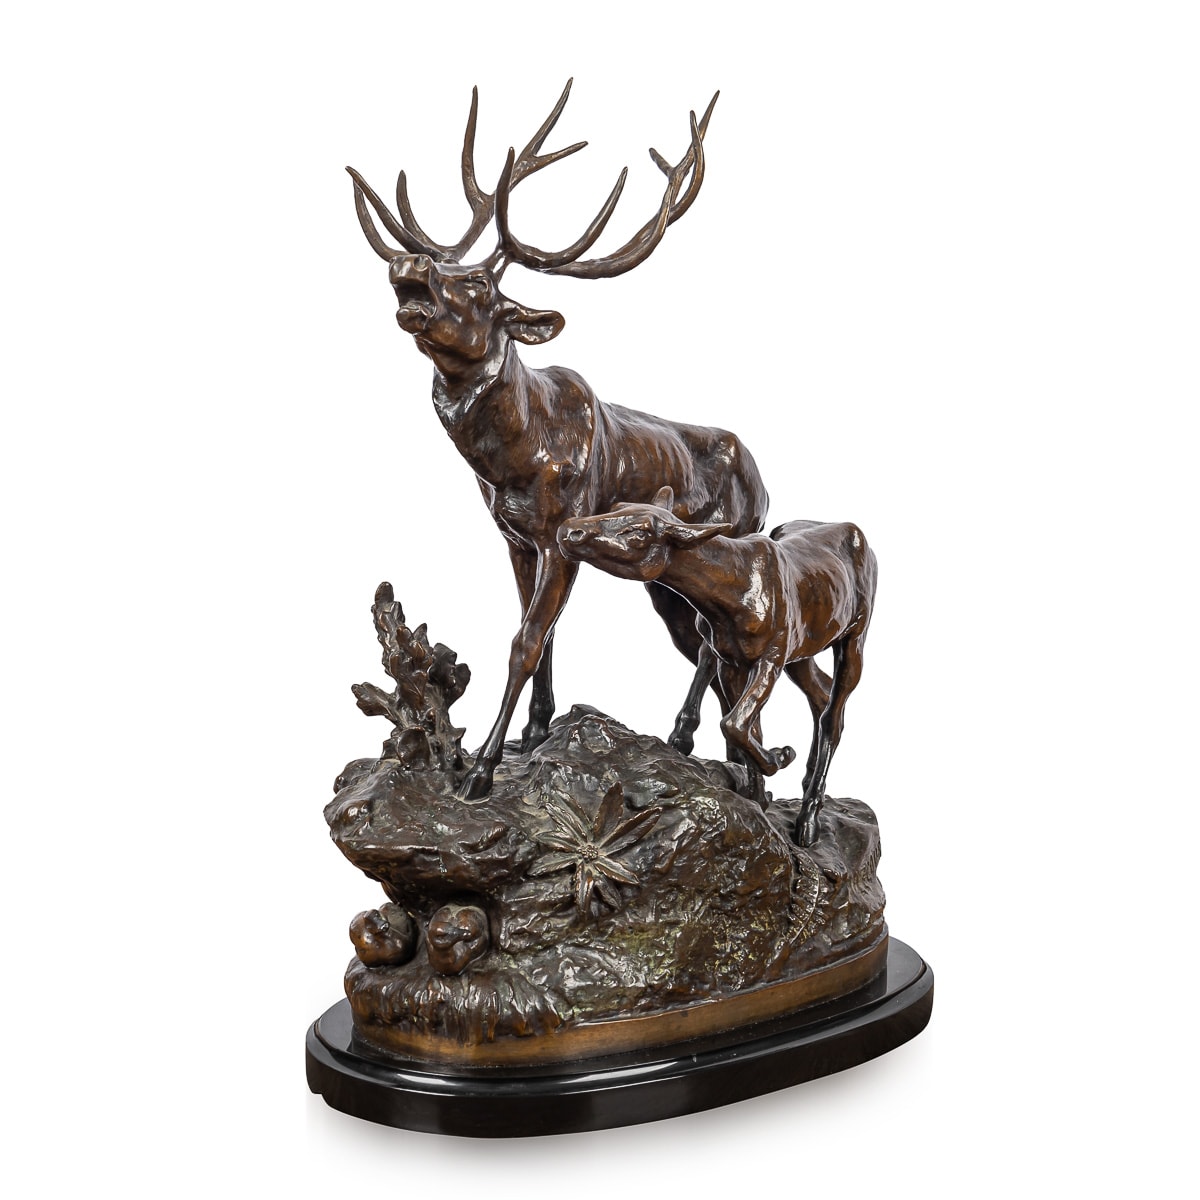 PROSPER LECOURTIER (1851-1925): A 19TH CENTURY BRONZE OF A STAG AND DOE